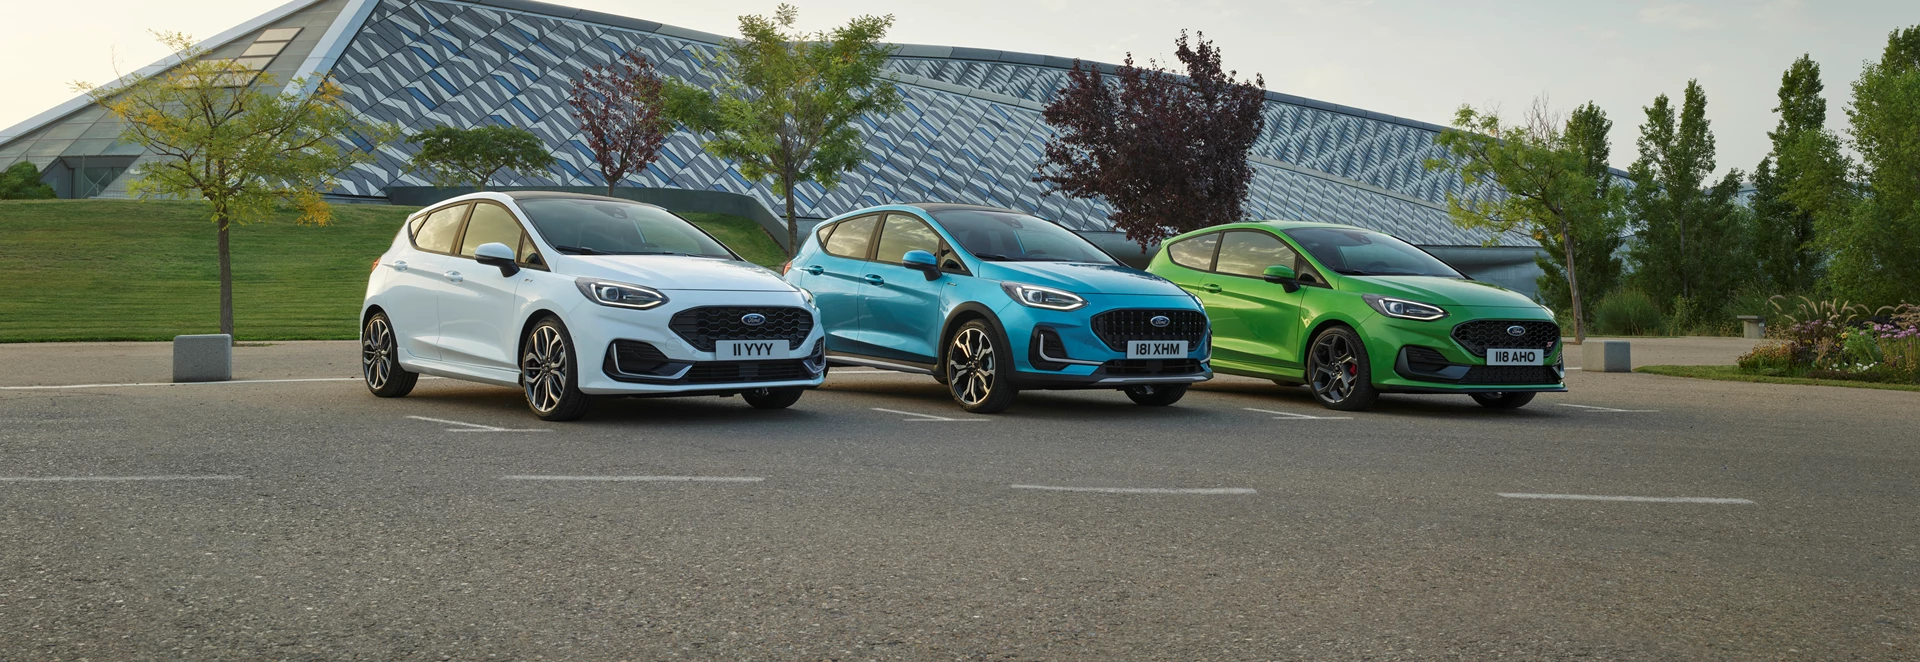 New 2022 Ford Fiesta revealed with updated design and more technology 